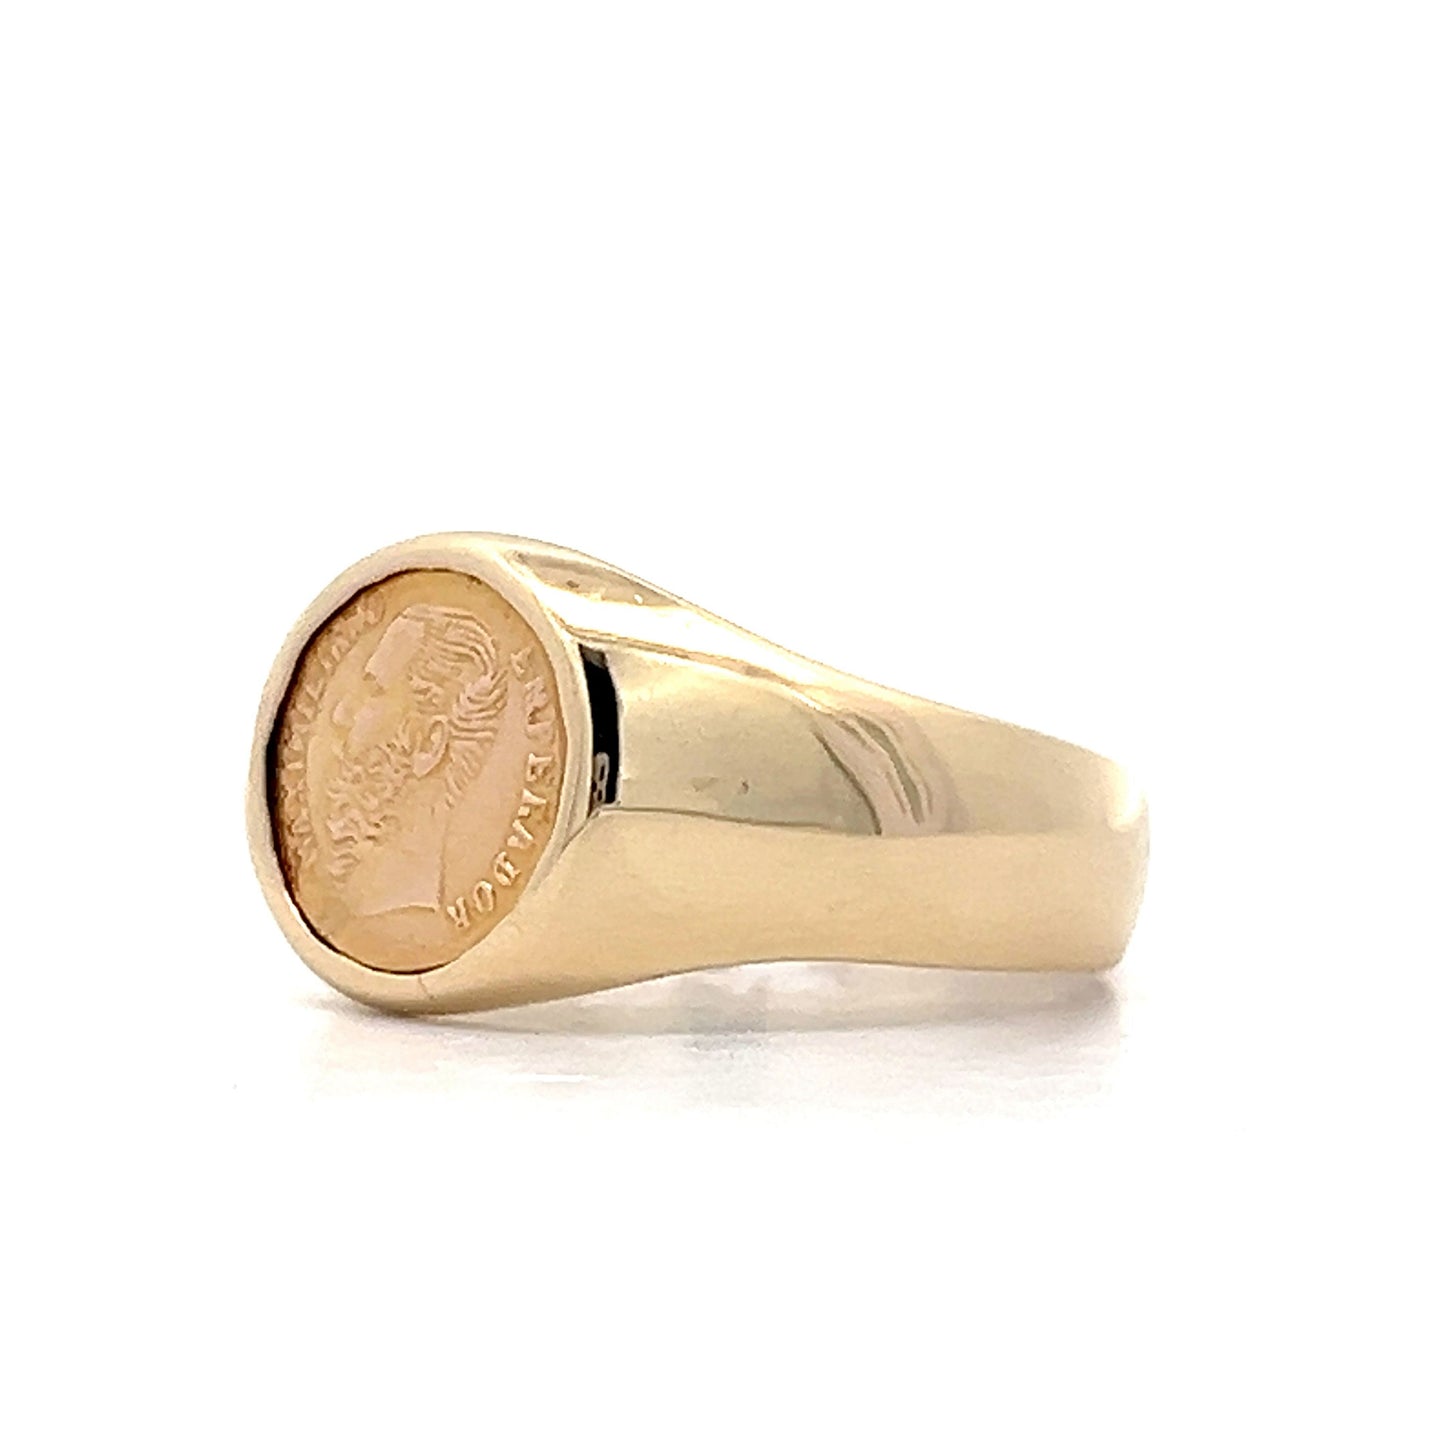 Vintage Mexican Peso Signet Ring in 14k Yellow Gold